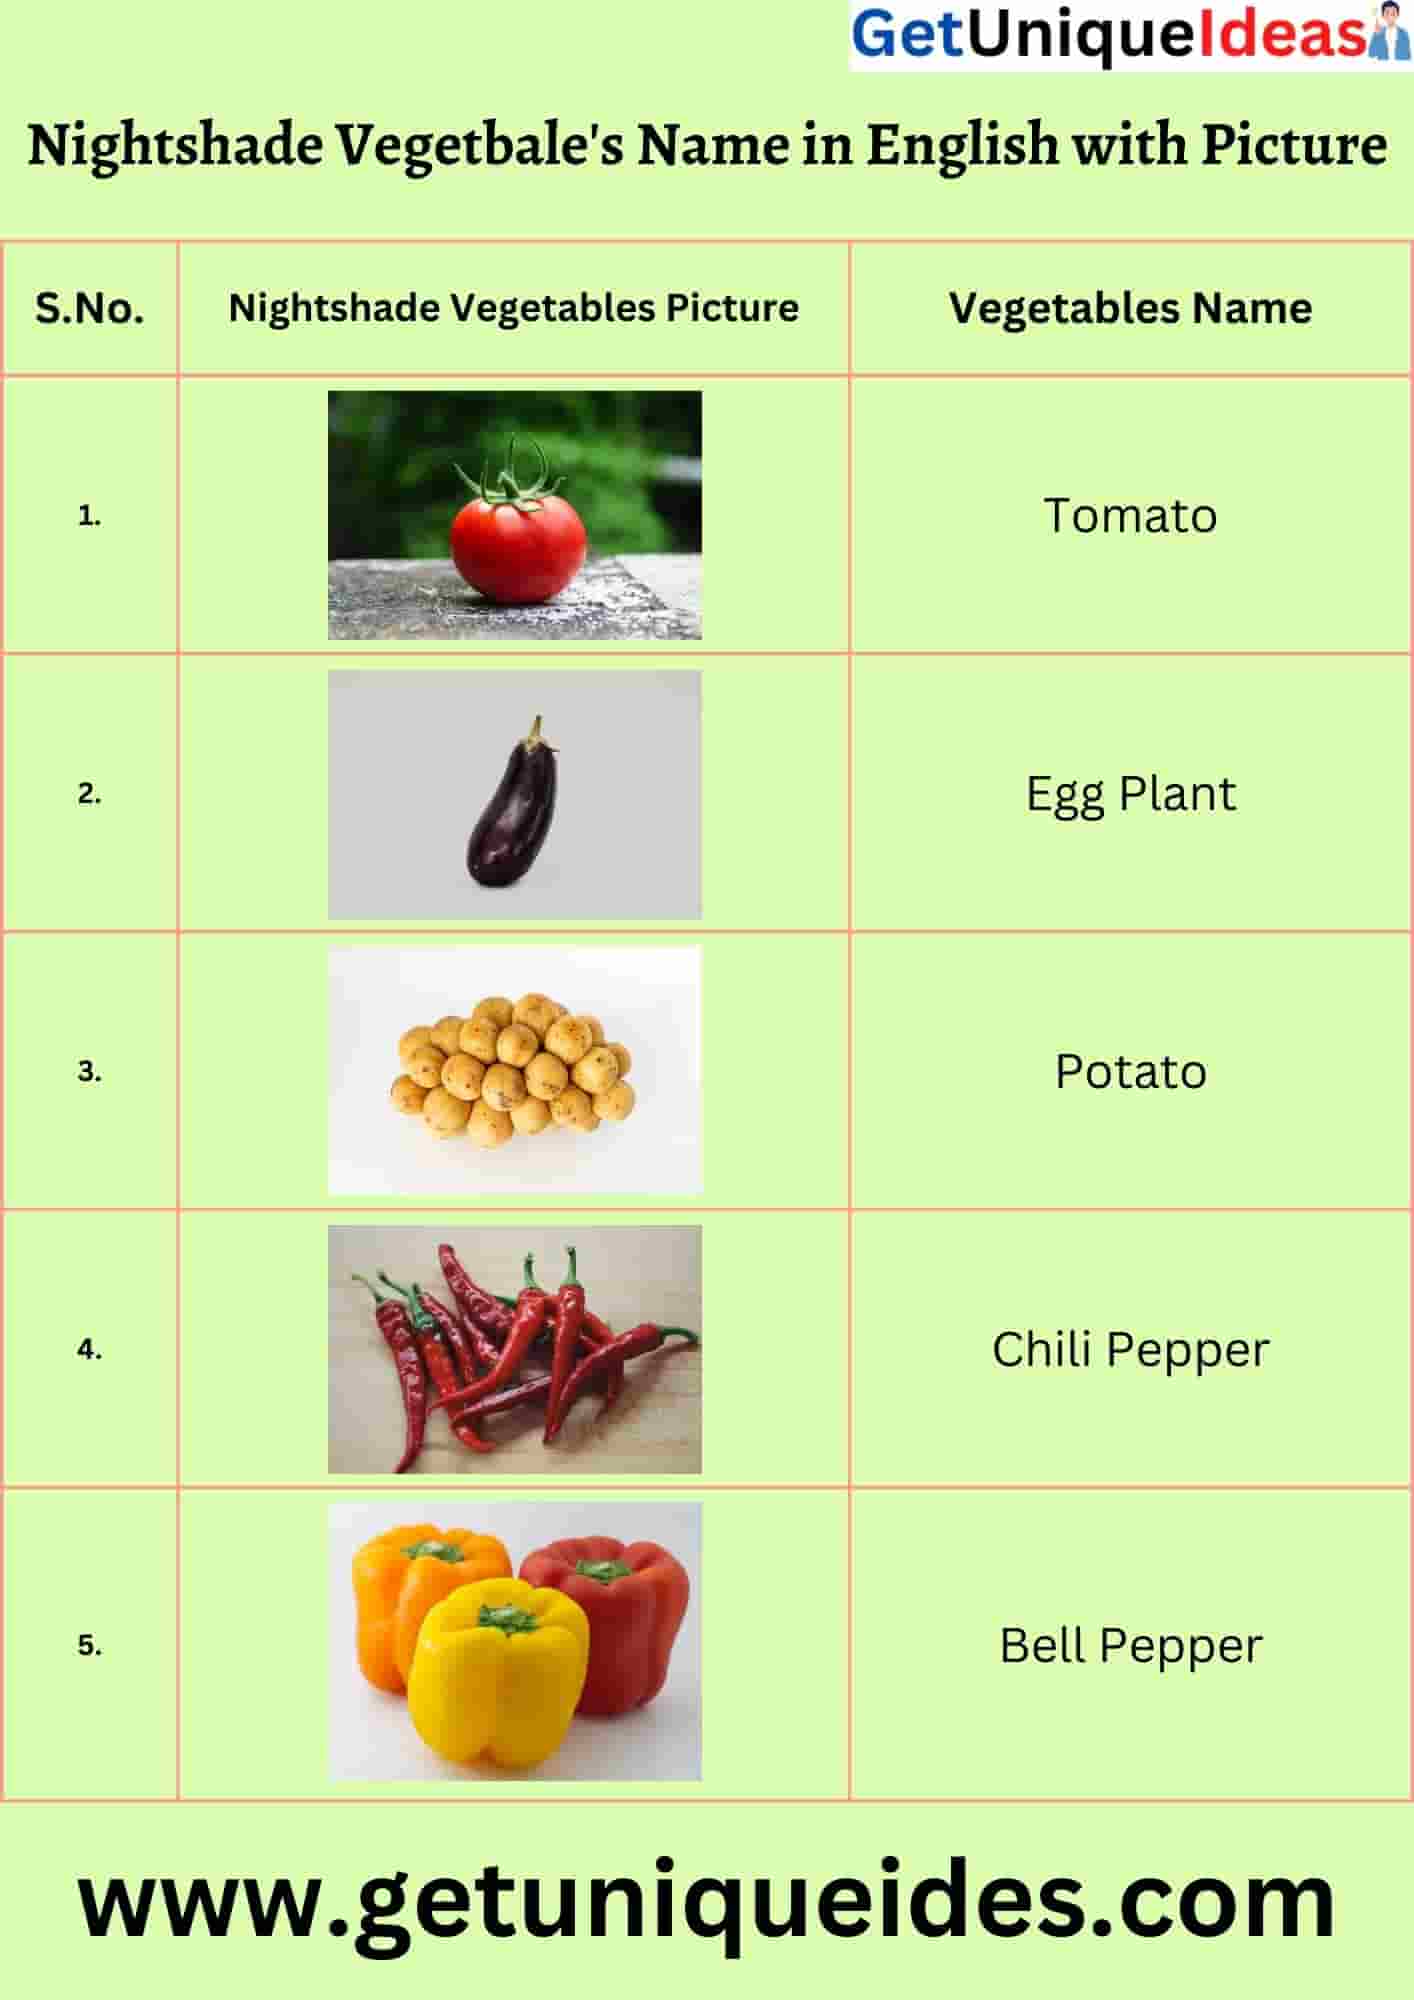 Nightshade Vegetable's Name in English with Picture